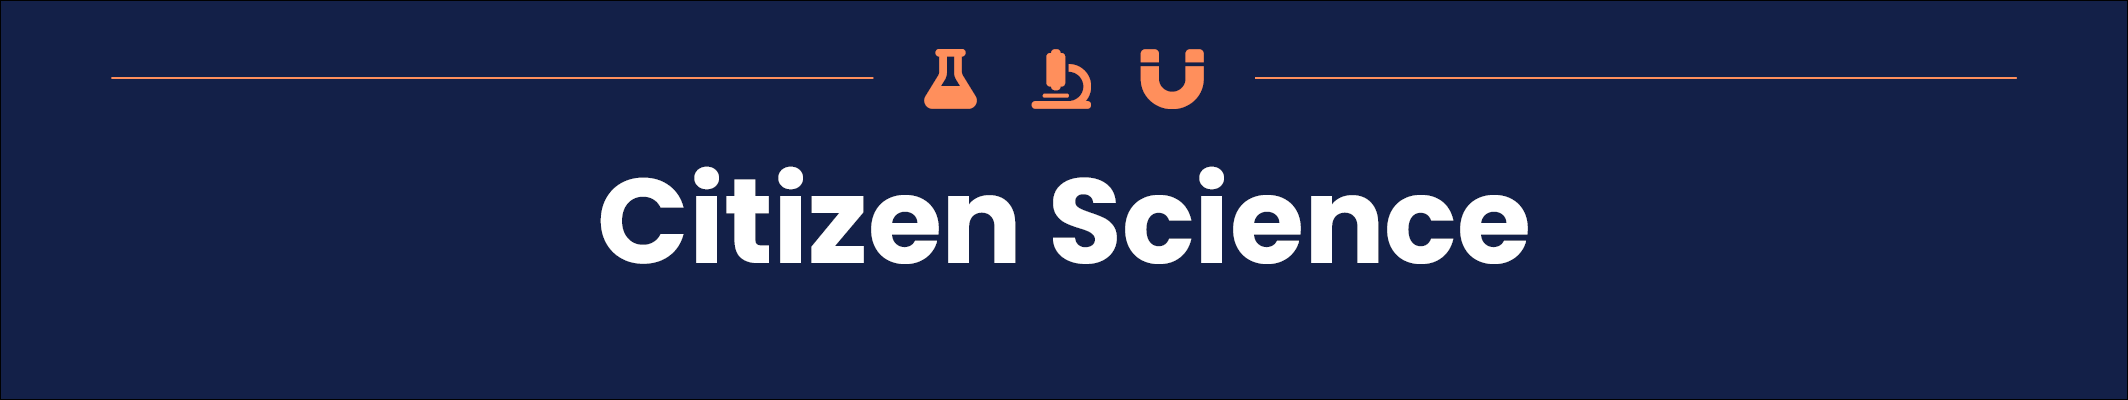 Citizen Science in white font on a dark blue background with orange symbols of a beaker, magnifying glass and magnet above it.